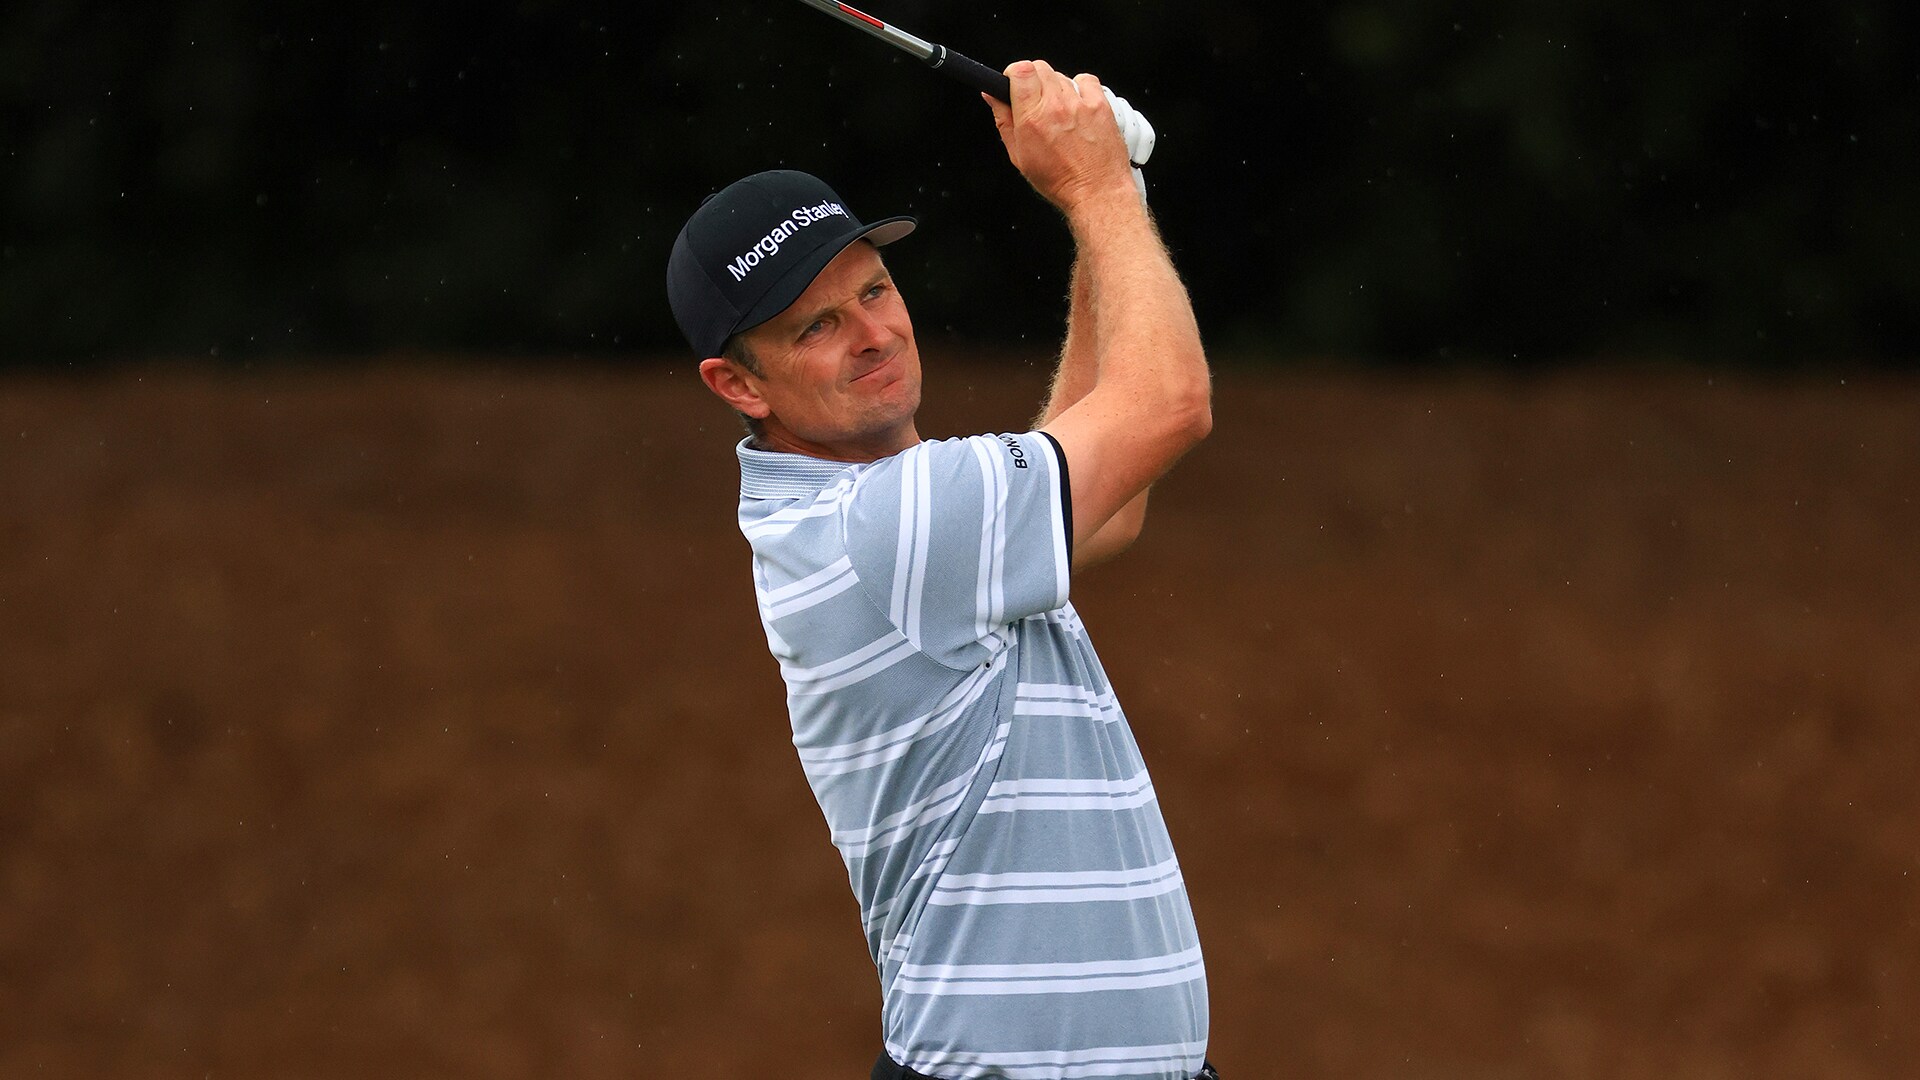 Justin Rose WDs at Bay Hill, leaves Jordan Spieth as solo in Round 3